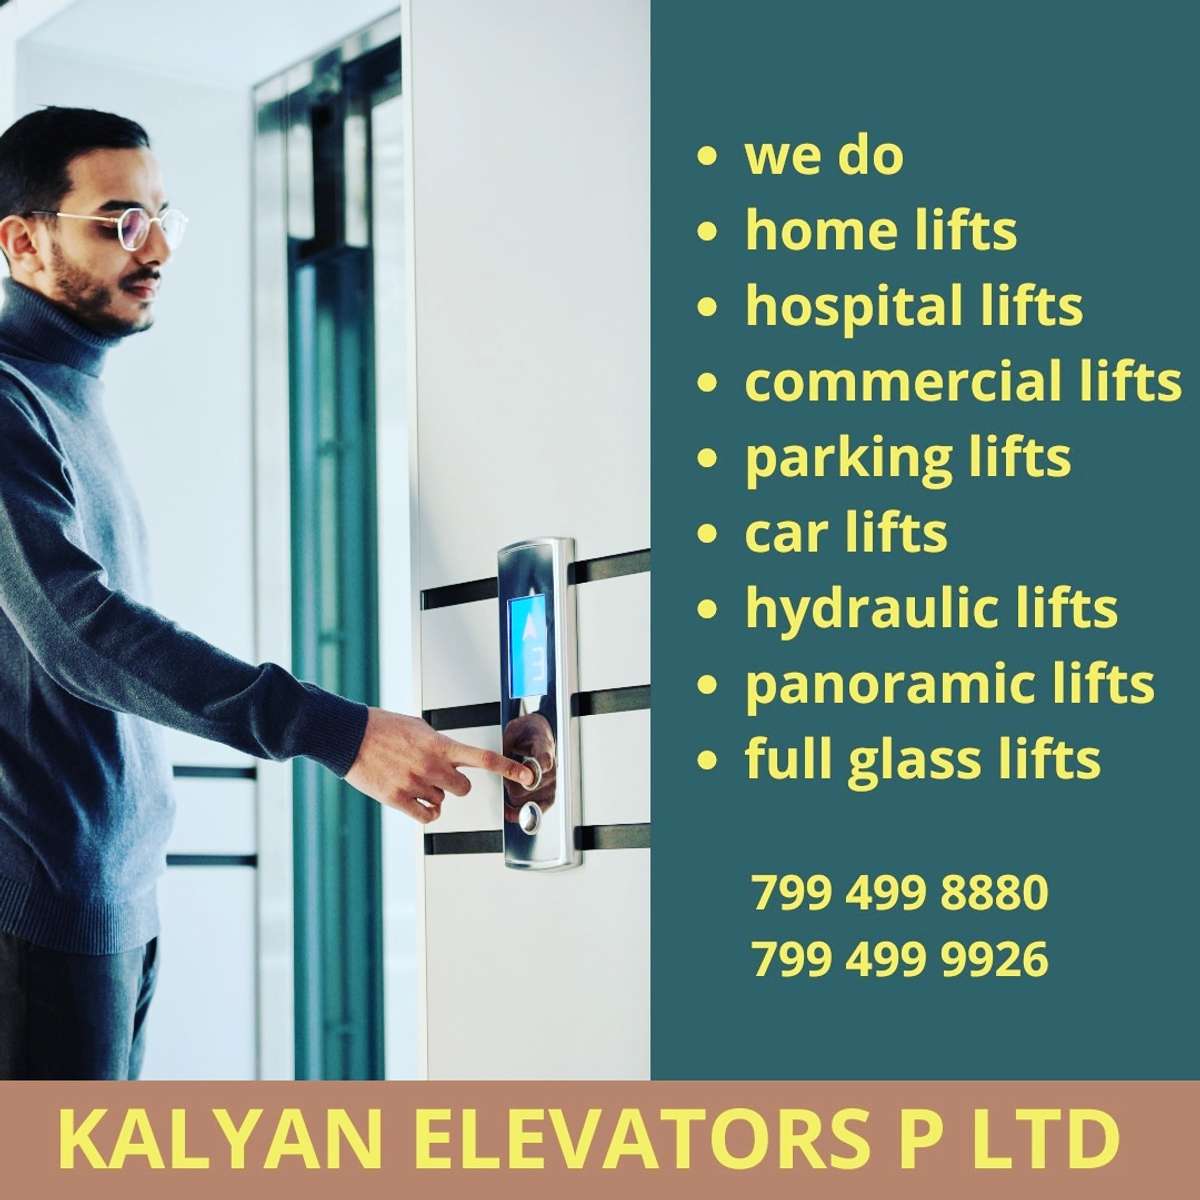 Kalyan Home Elevators offers the long-awaited solution to vertical mobility within homes at affordable prices and easy-to-use features. Our customized and aesthetically designed home lifts are easily installable in preexisting homes as well as houses under construction, and help you relieve the headache of climbing. More details:- 

we do all kind of :-
Home Lifts
Hospital Lifts
Capsule Lifts
Commercial Lifts
Customised Passenger Lifts
Car Lifts
Parking Lifts